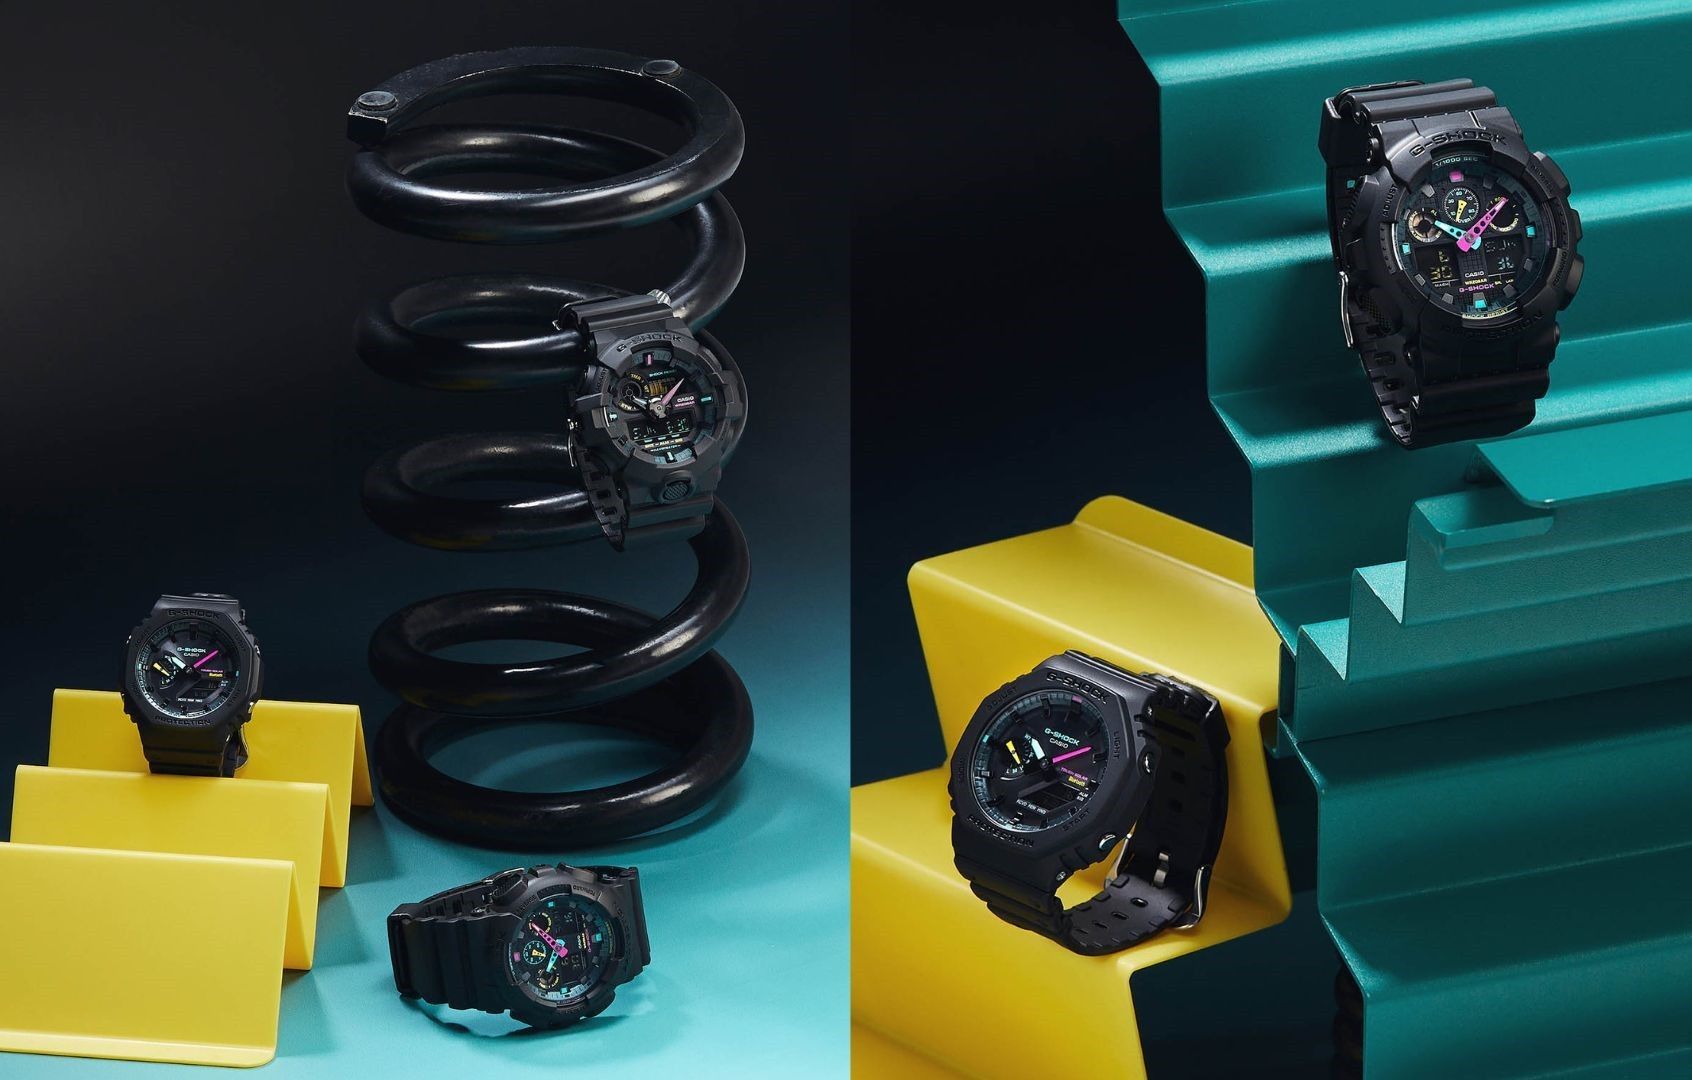 G-Shock releases new watch series with fluorescent accents